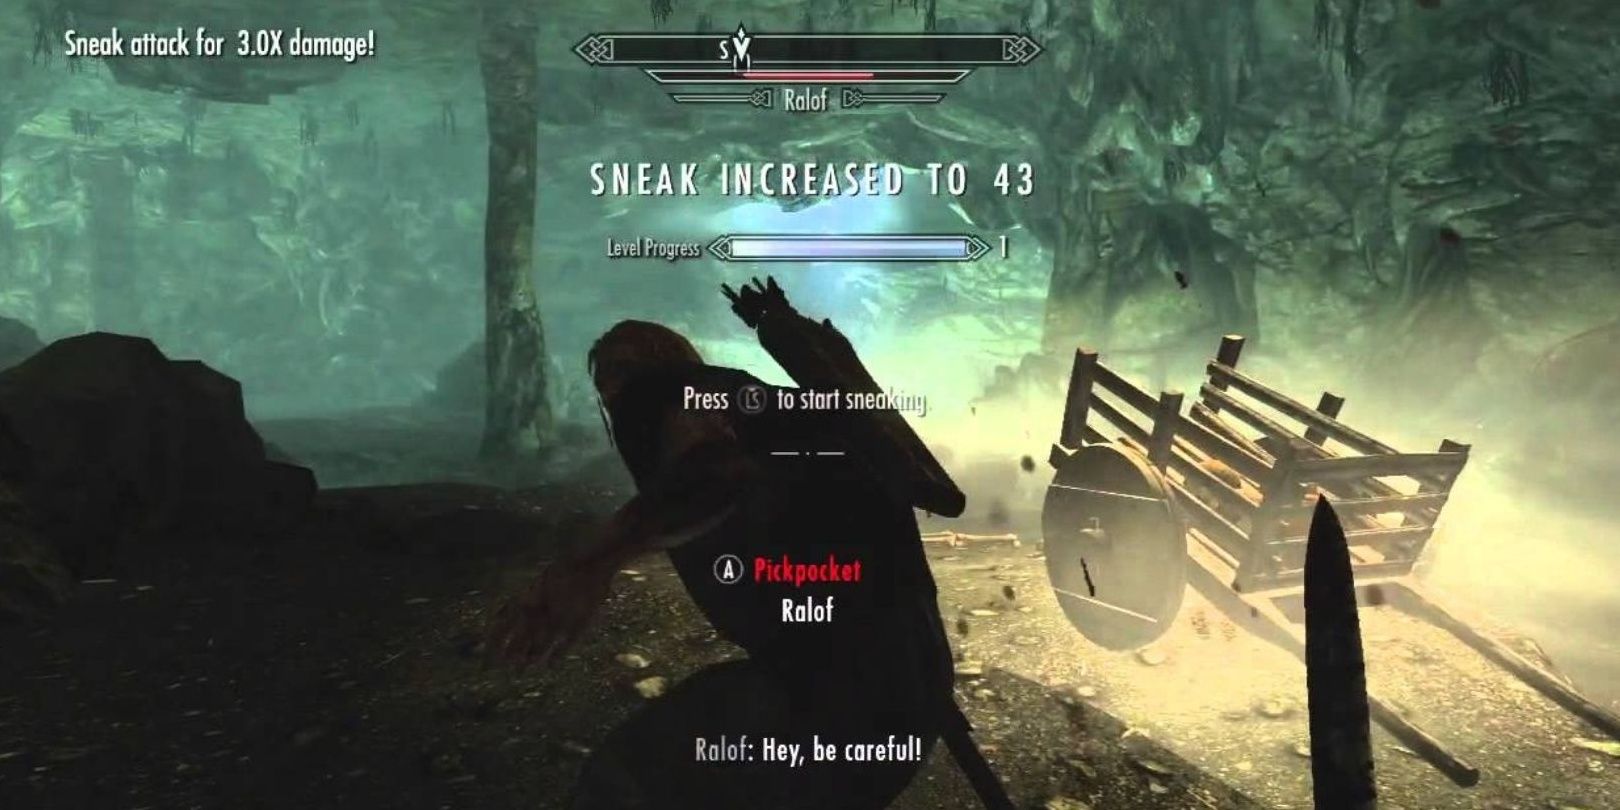 Skyrim Player in Stealth Mode in the tutorial cave